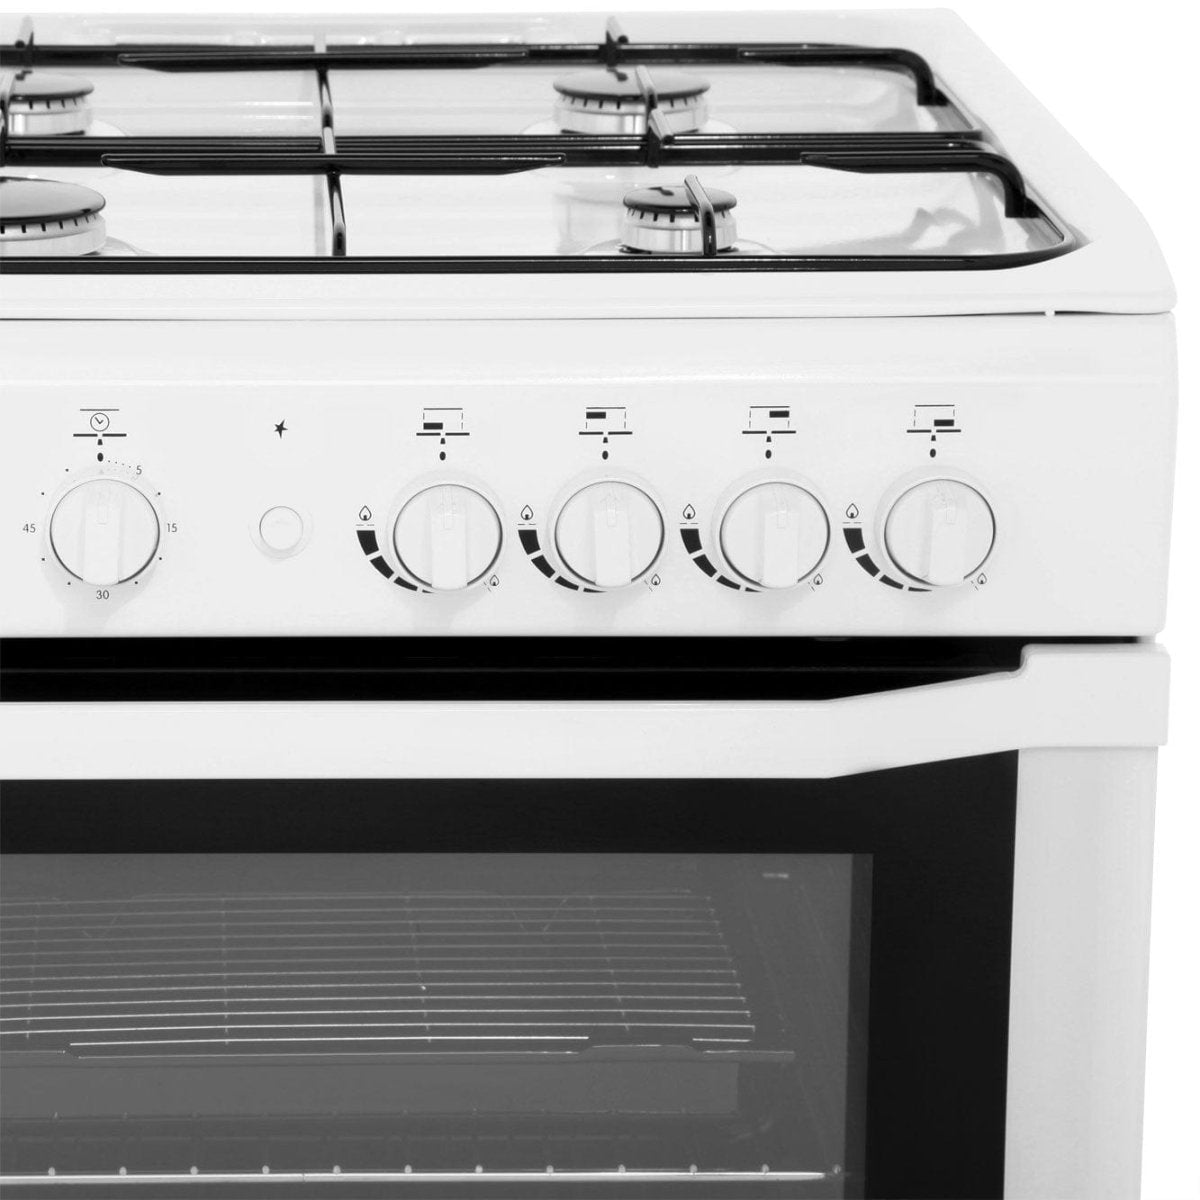 INDESIT I6GG1W 60cm Gas Cooker with Single Oven - White - Atlantic Electrics